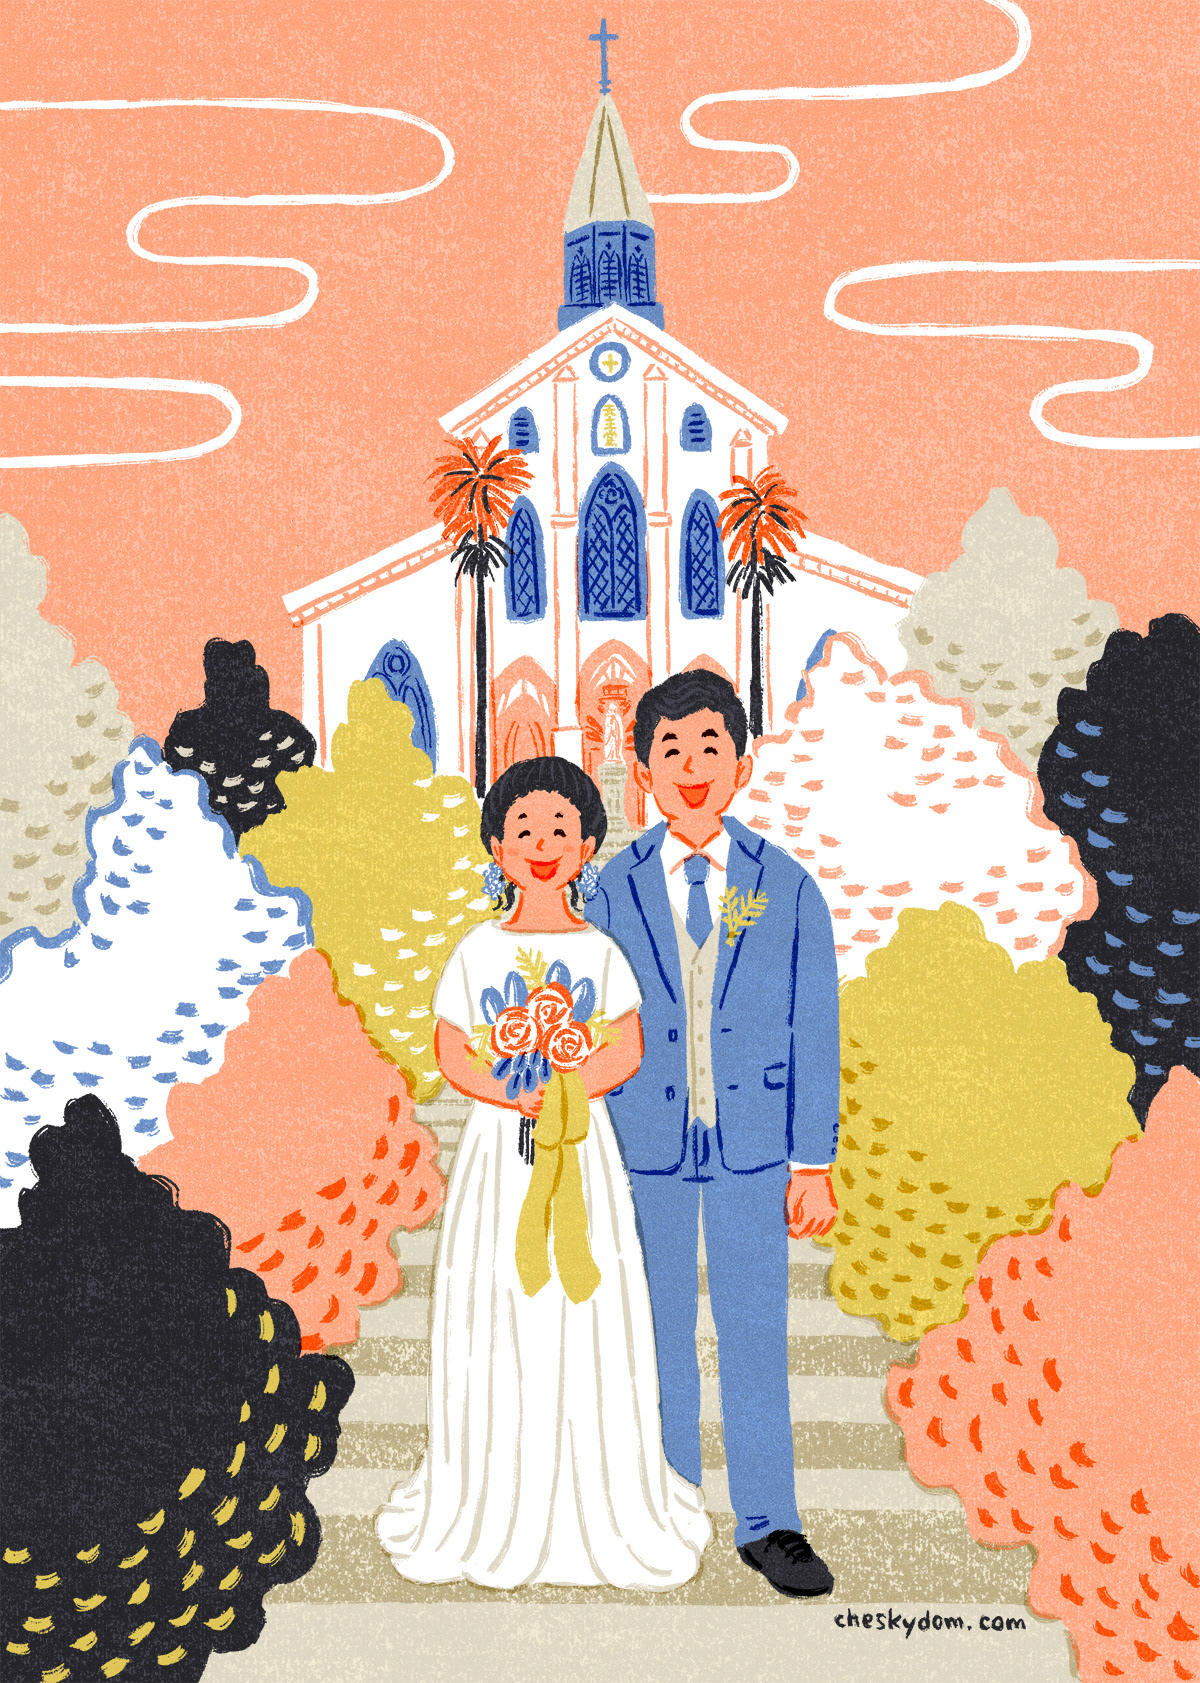 The illustration of a couple getting married at a famous church in Japan.